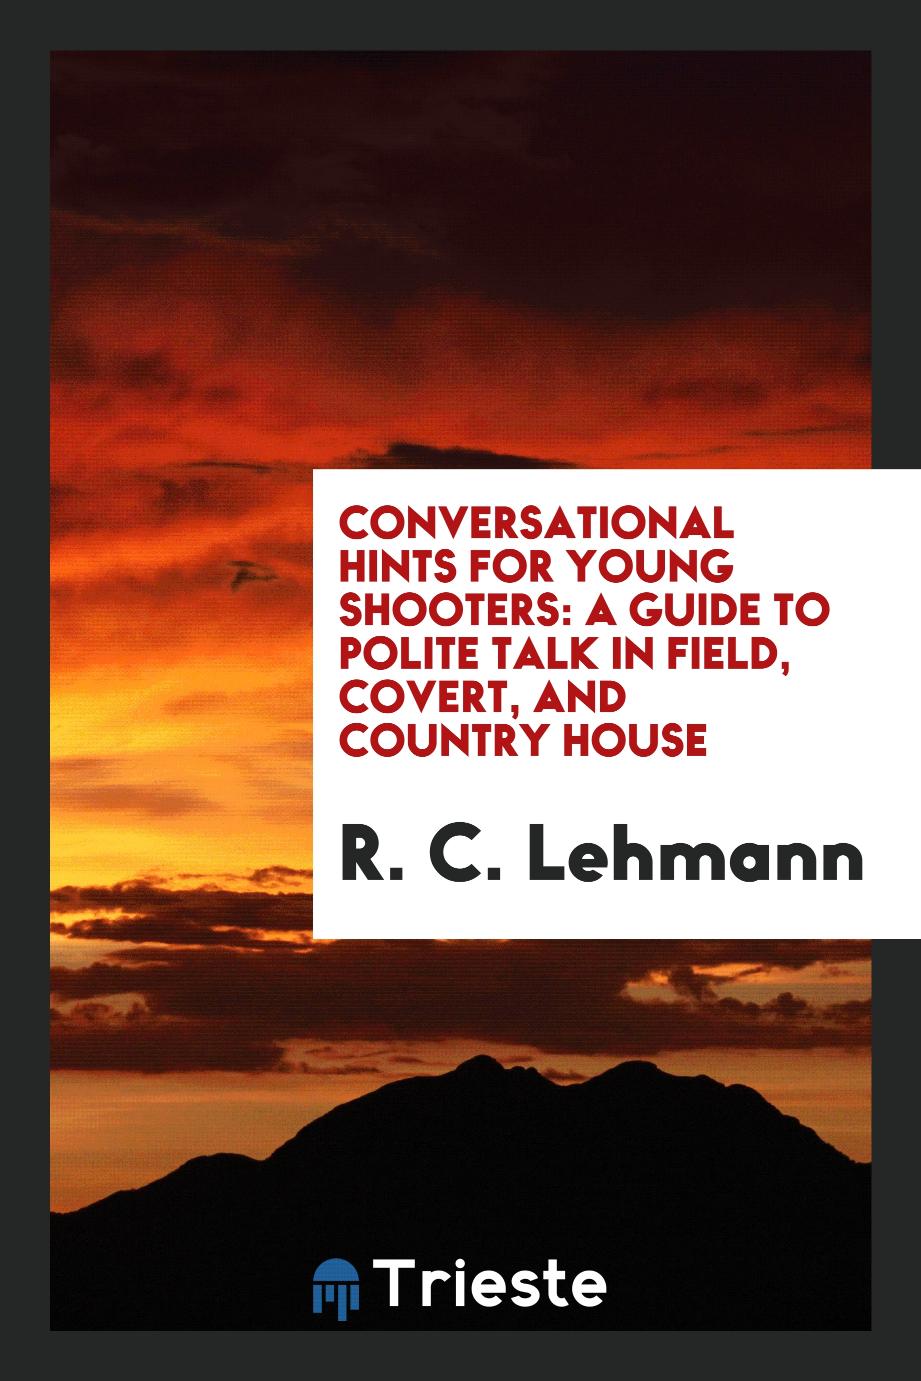 Conversational Hints for Young Shooters: A Guide to Polite Talk in Field, Covert, and Country House